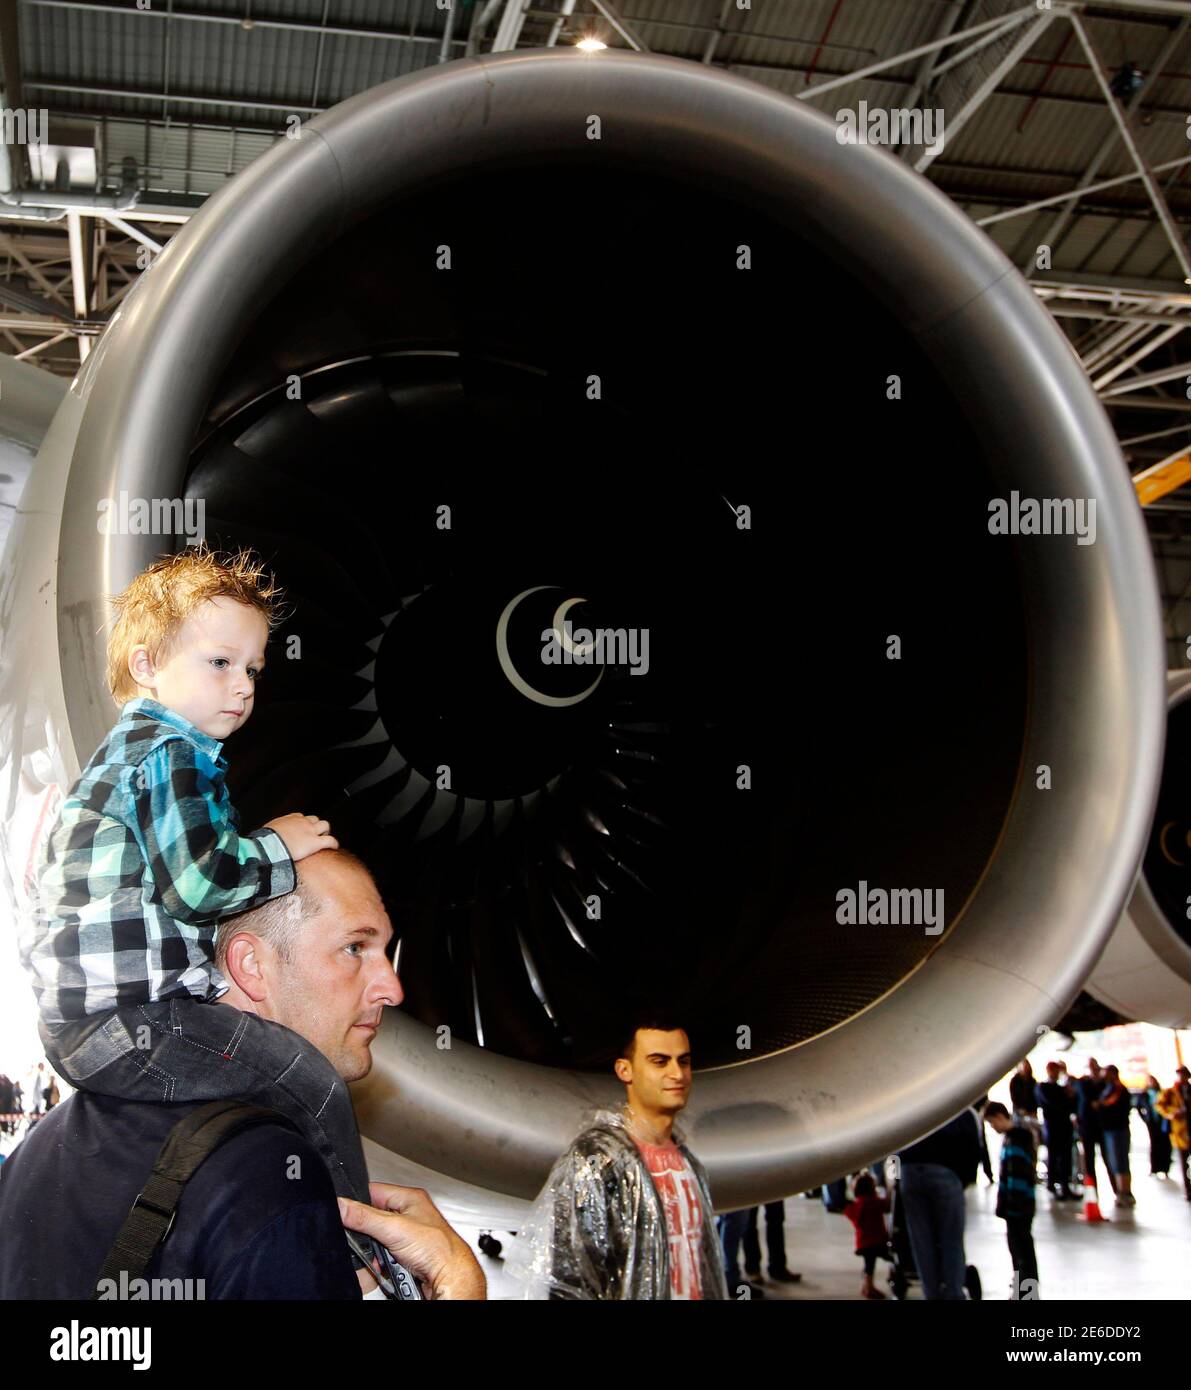 A Qantas employee and his son wait to have their picture taken next to one of the engines of a Qantas A380 during Qantas' 90th anniversary celebrations at Sydney Airport November 6, 2010. Engine trouble forced QF6 a Qantas Airways Ltd Boeing 747-400 jet to make an emergency landing in Singapore on Friday, less than 48 hours after another of the Australian carrier's aircraft had to land prematurely because its engine blew up. REUTERS/Daniel Munoz (AUSTRALIA - Tags: TRANSPORT ANNIVERSARY) Stock Photo